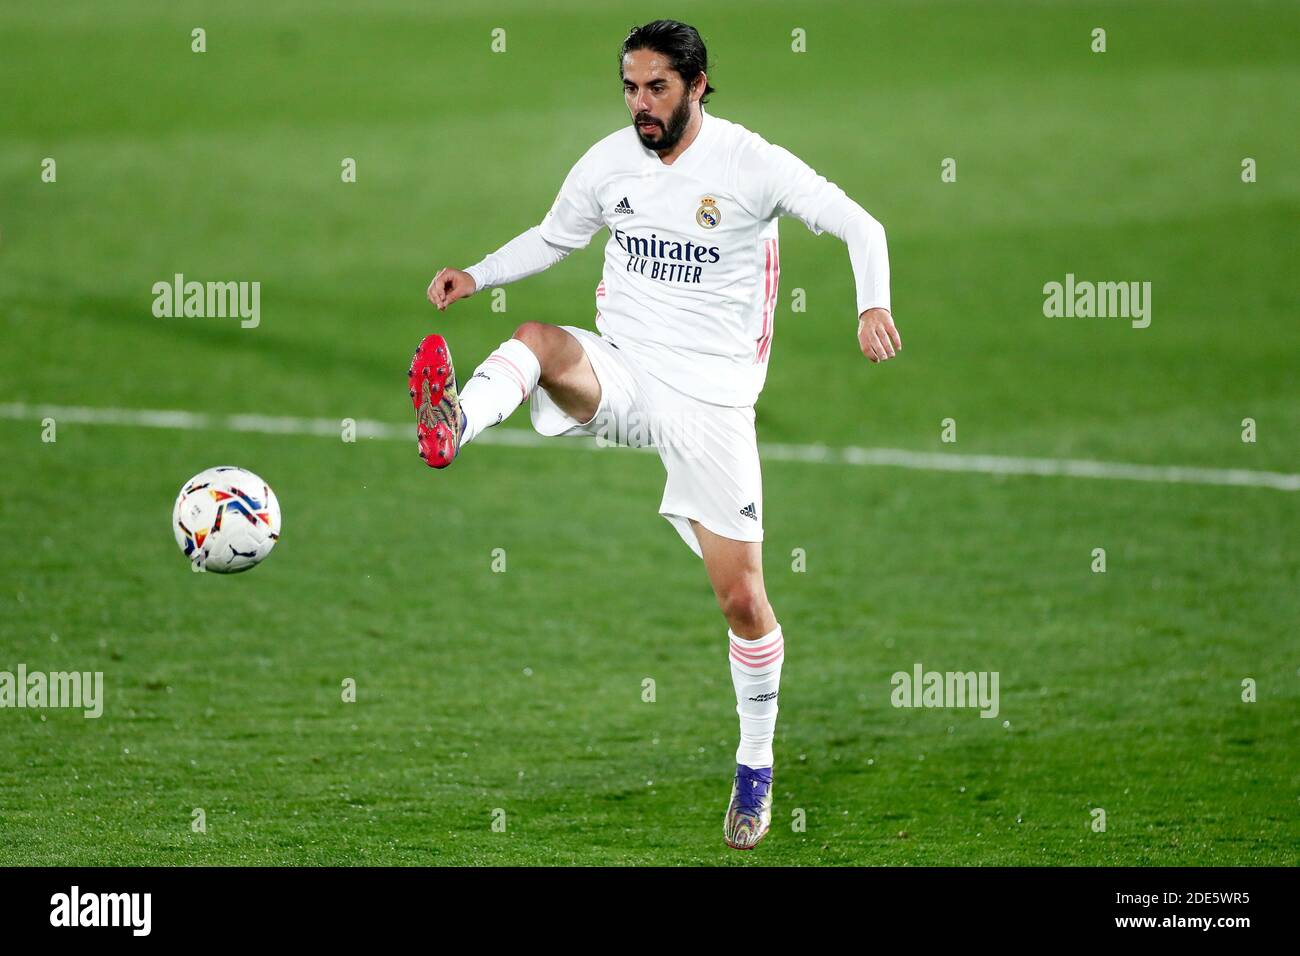 Francisco 'Isco' Alarcon of Real Madrid during the Spanish championship La Liga football match between Real Madrid and Deportiv / LM Stock Photo